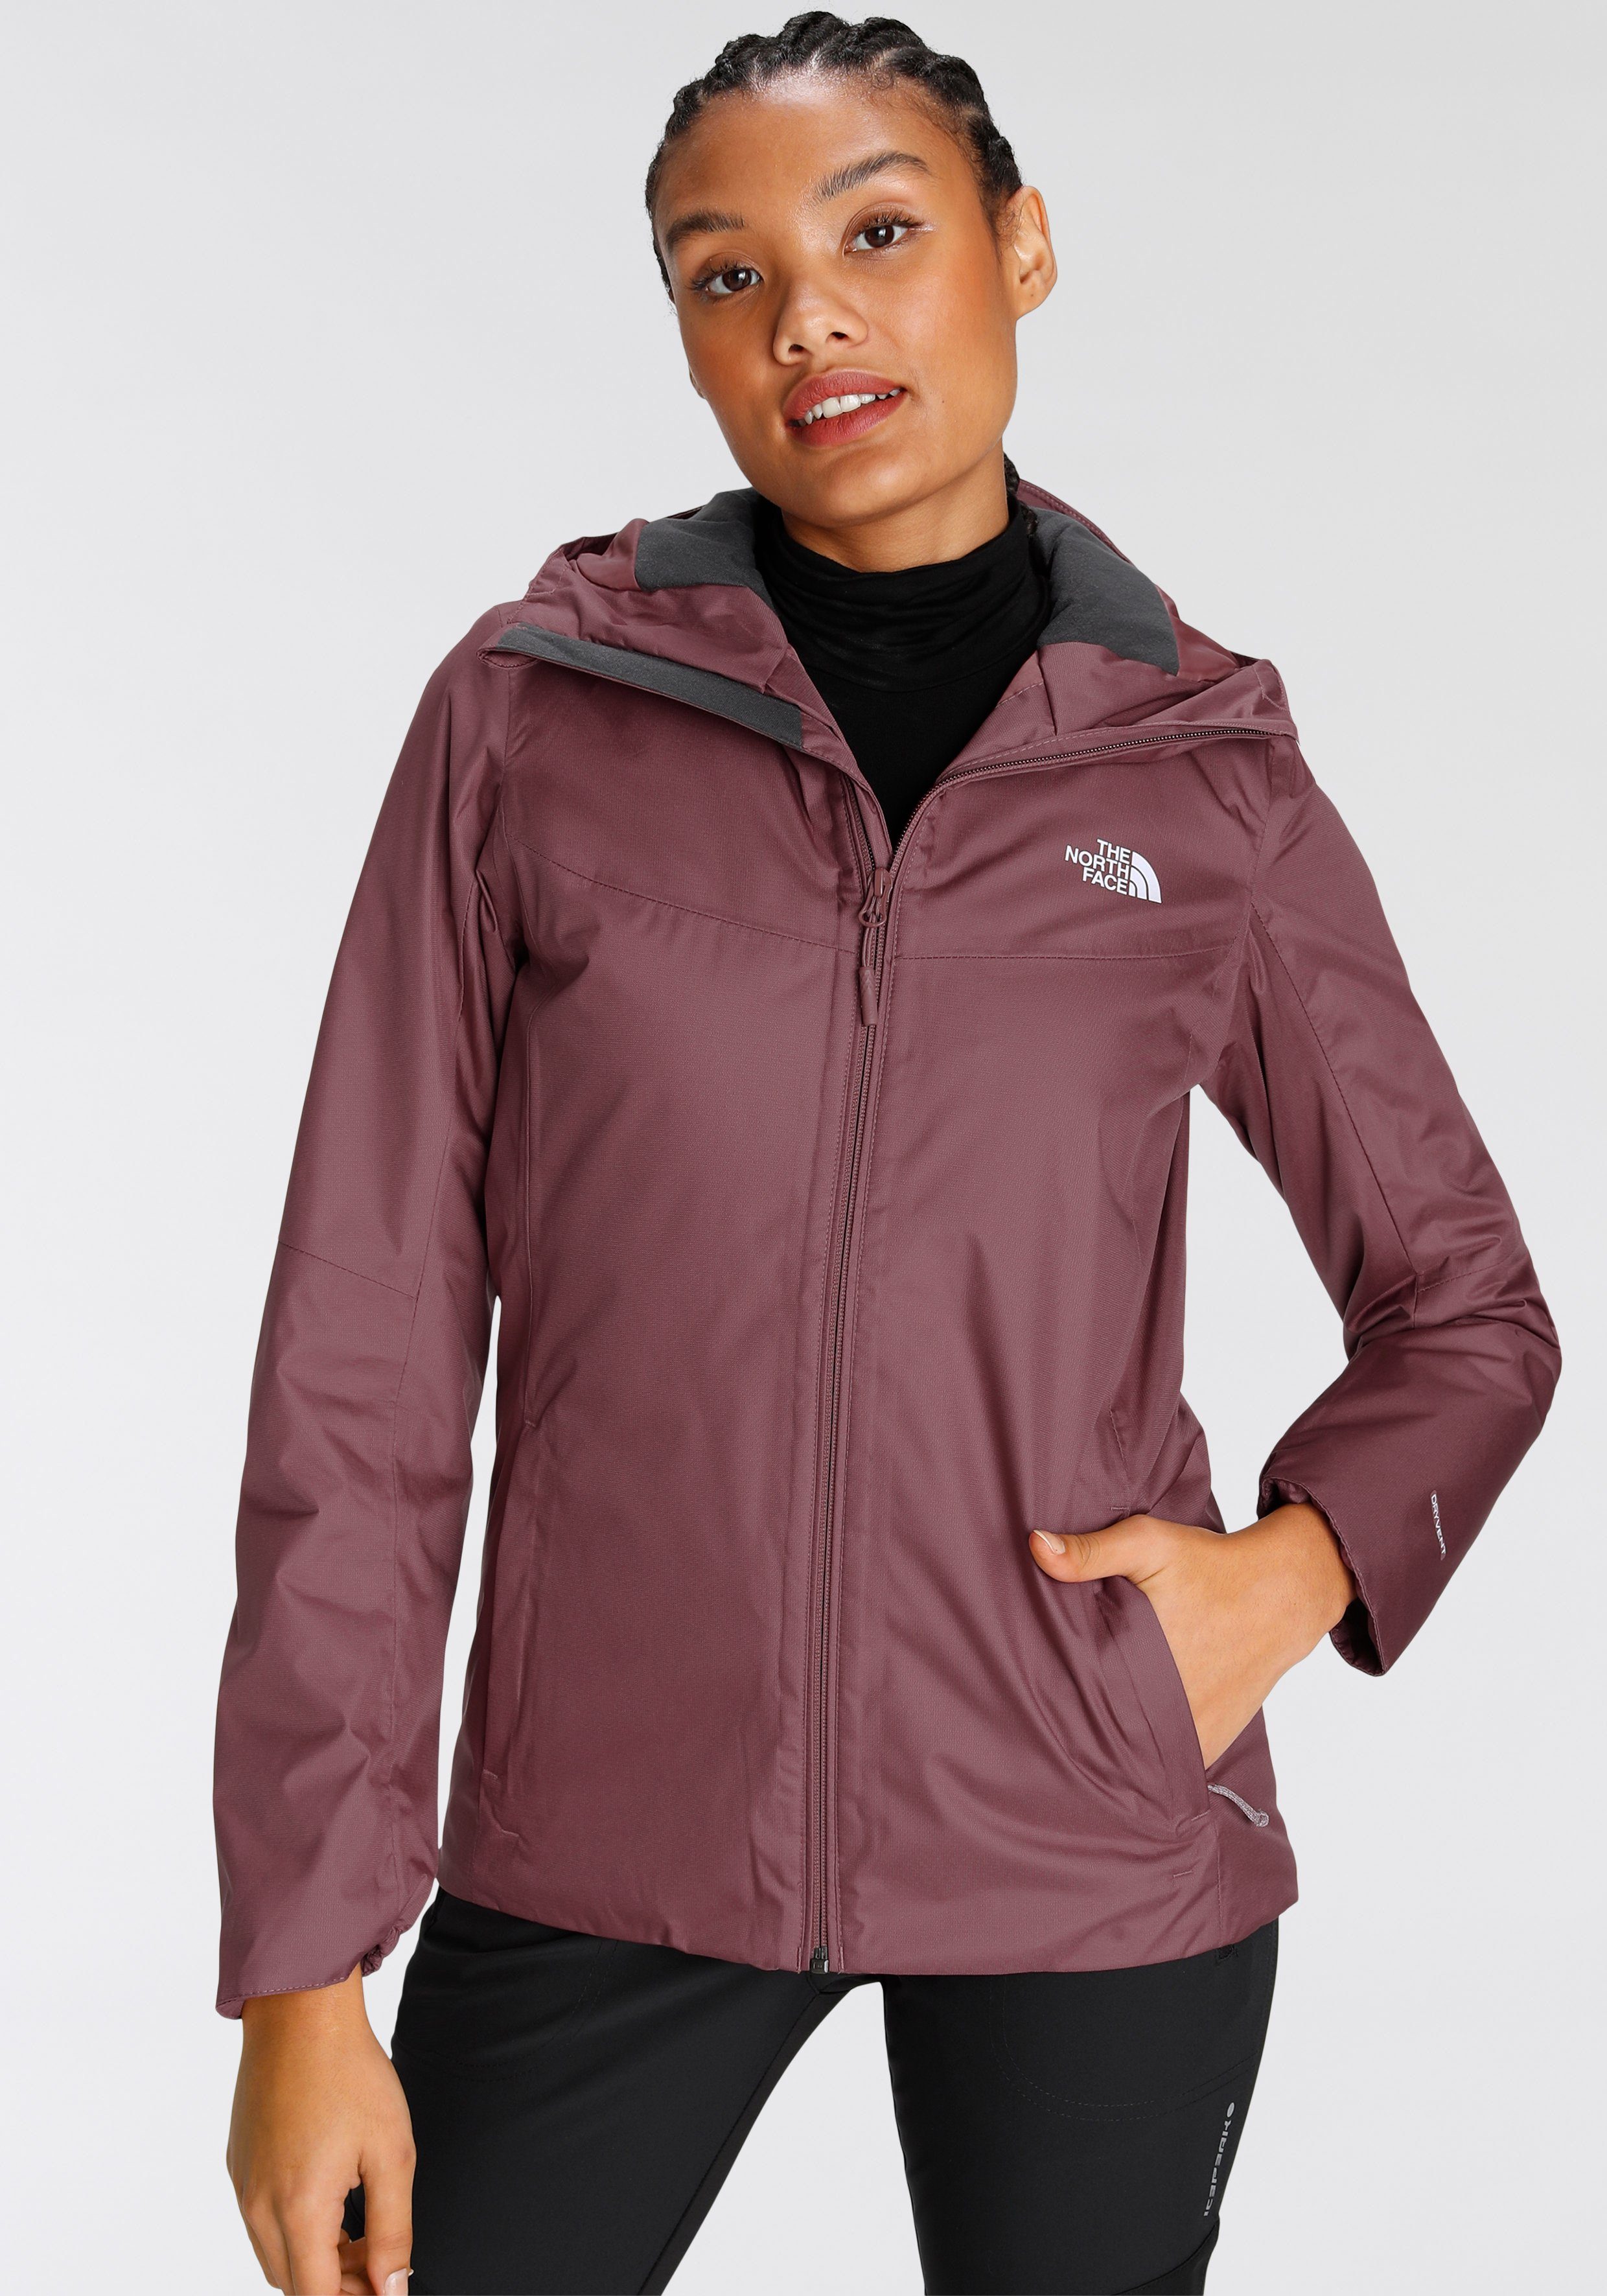 The North Face Funktionsjacke »QUEST« online kaufen | OTTO